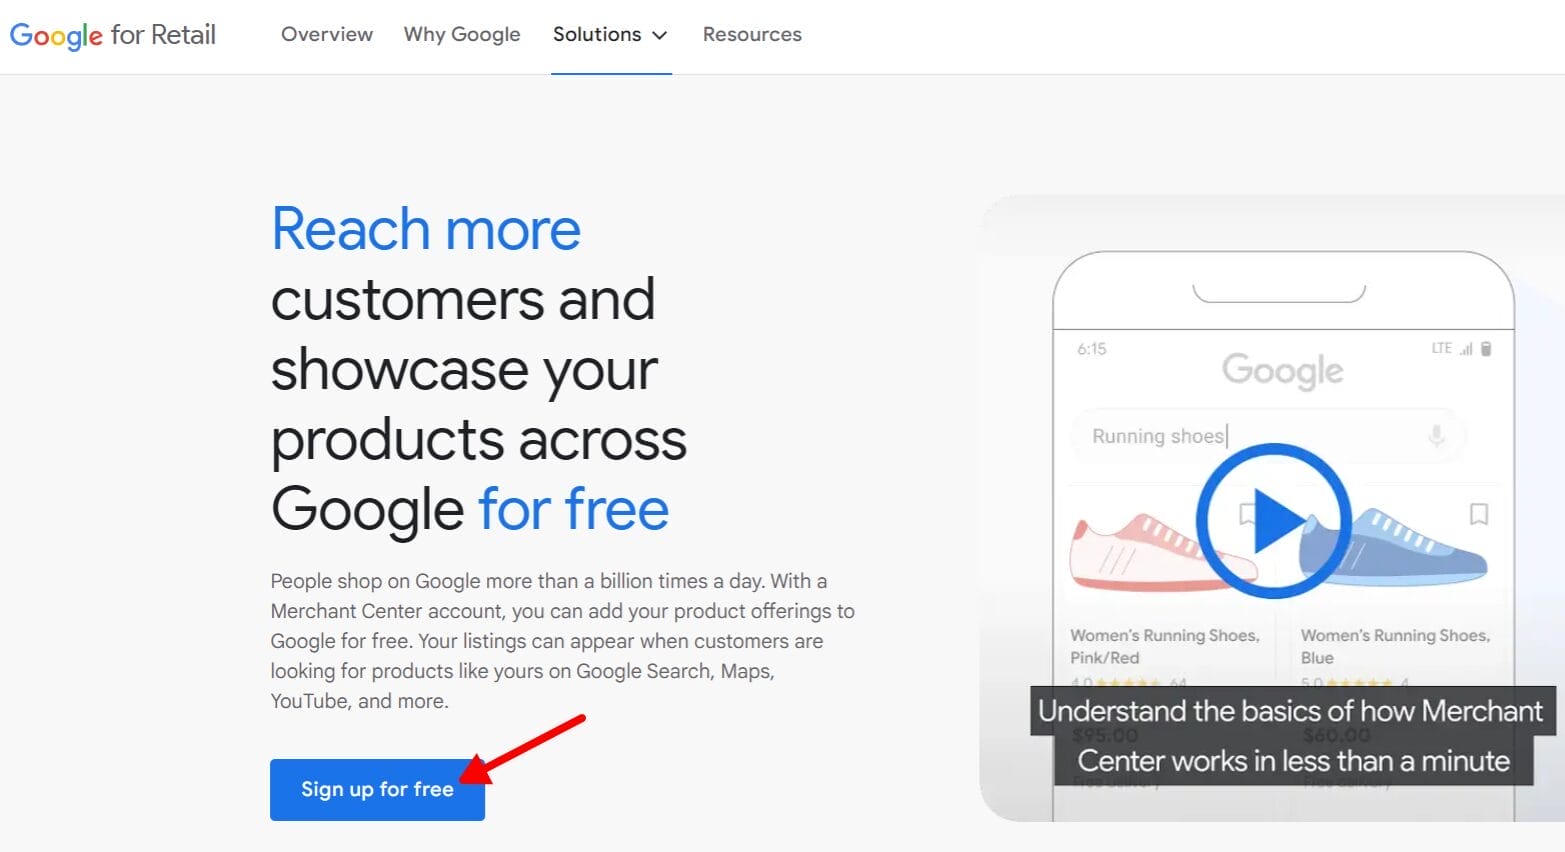 sign up for free on Google Merchant Center